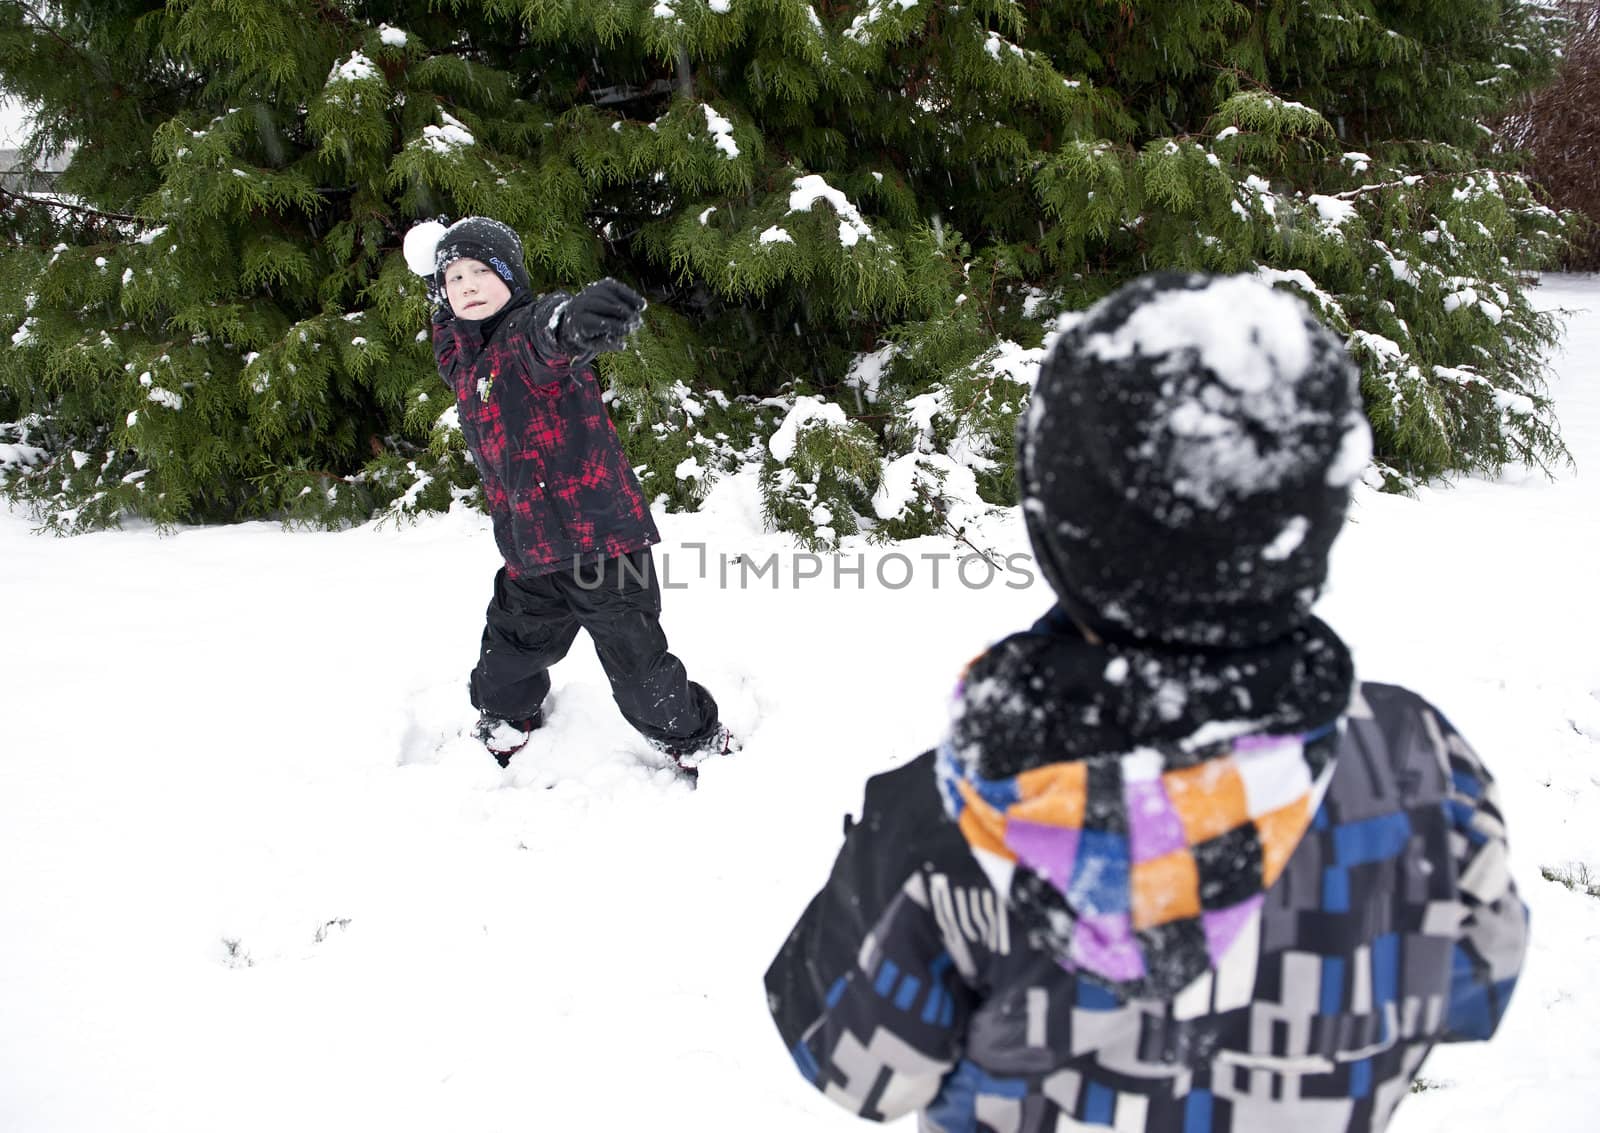 Children playing outdoors at winter time throwing snow balls at each other